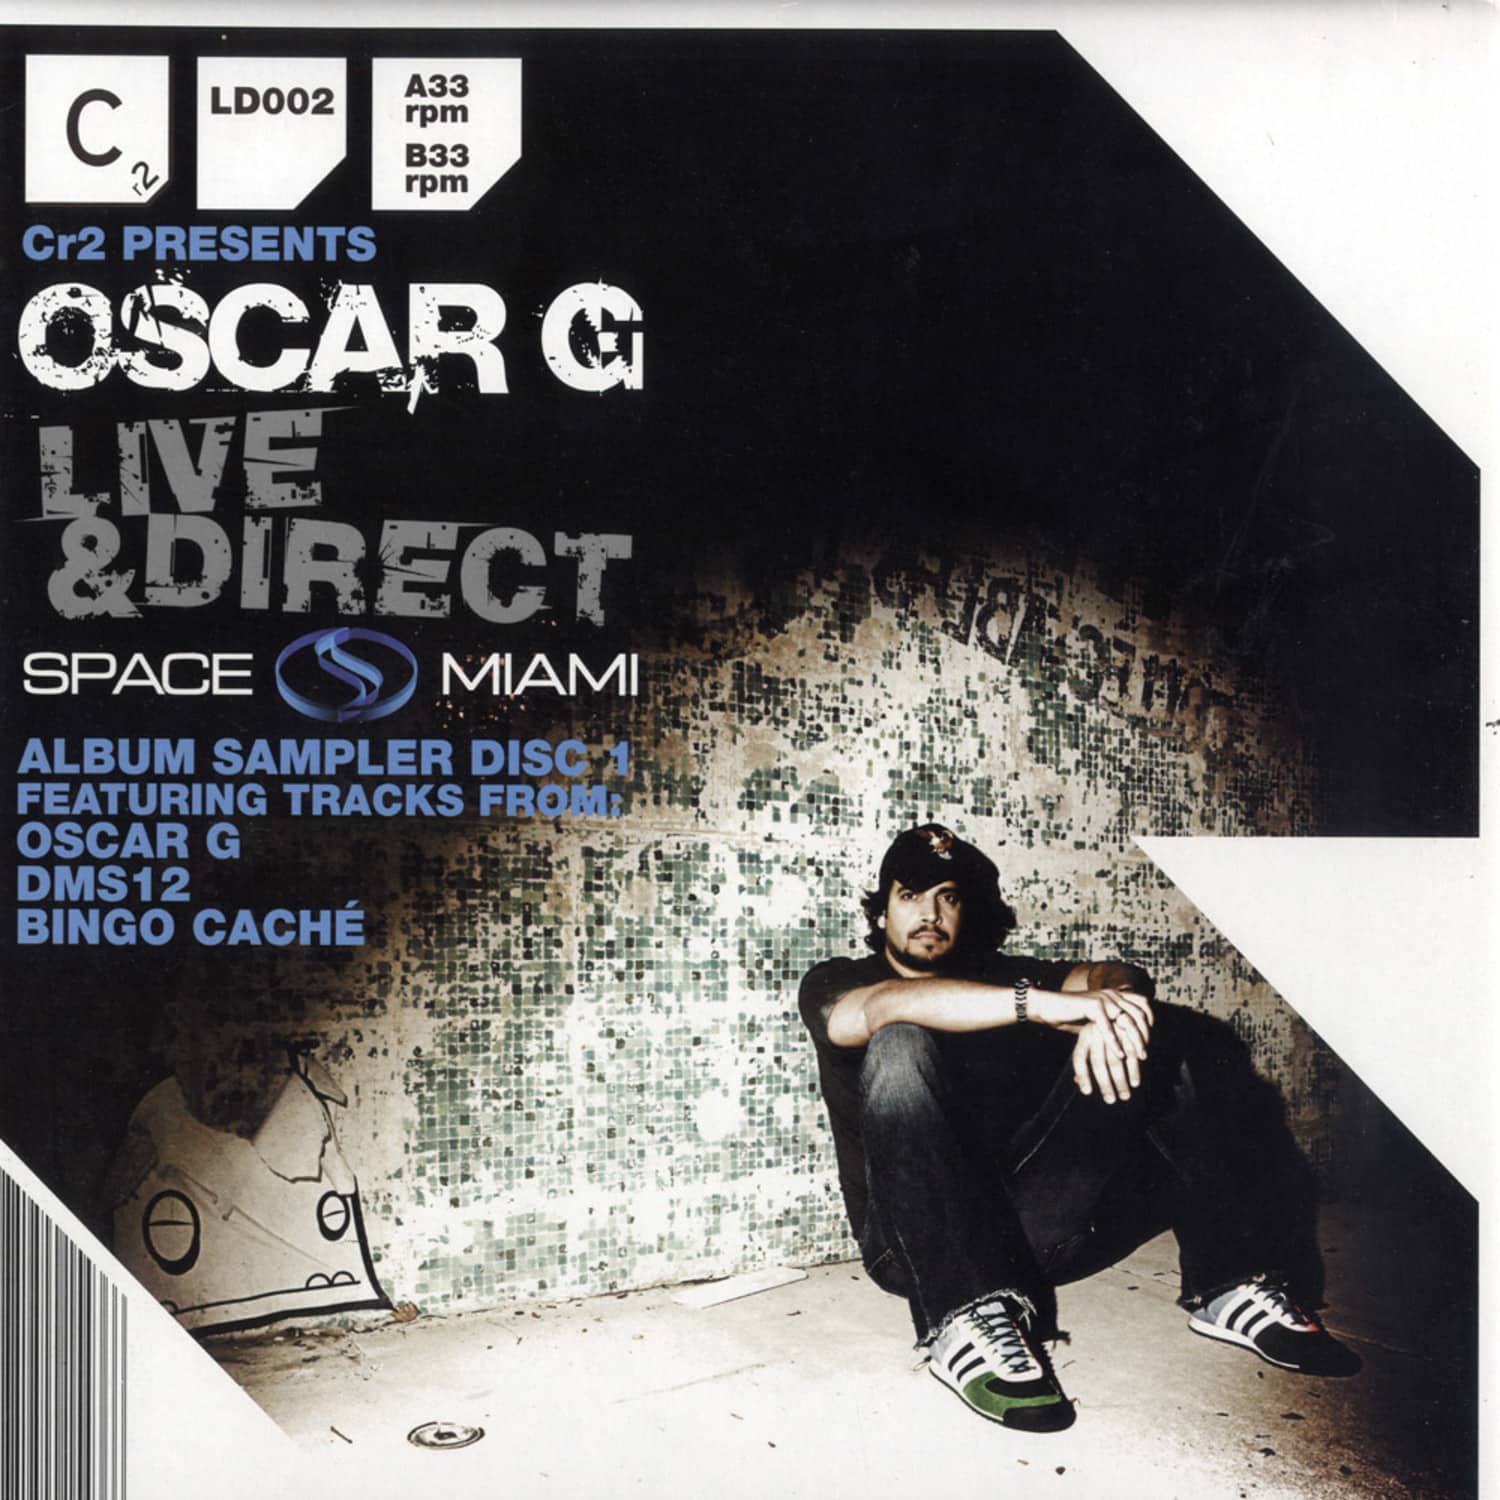 Oscar G - Space Miami - LIVE & DIRECT FROM SPACE MIAMI - ALBUM SAMPLER DISC 1